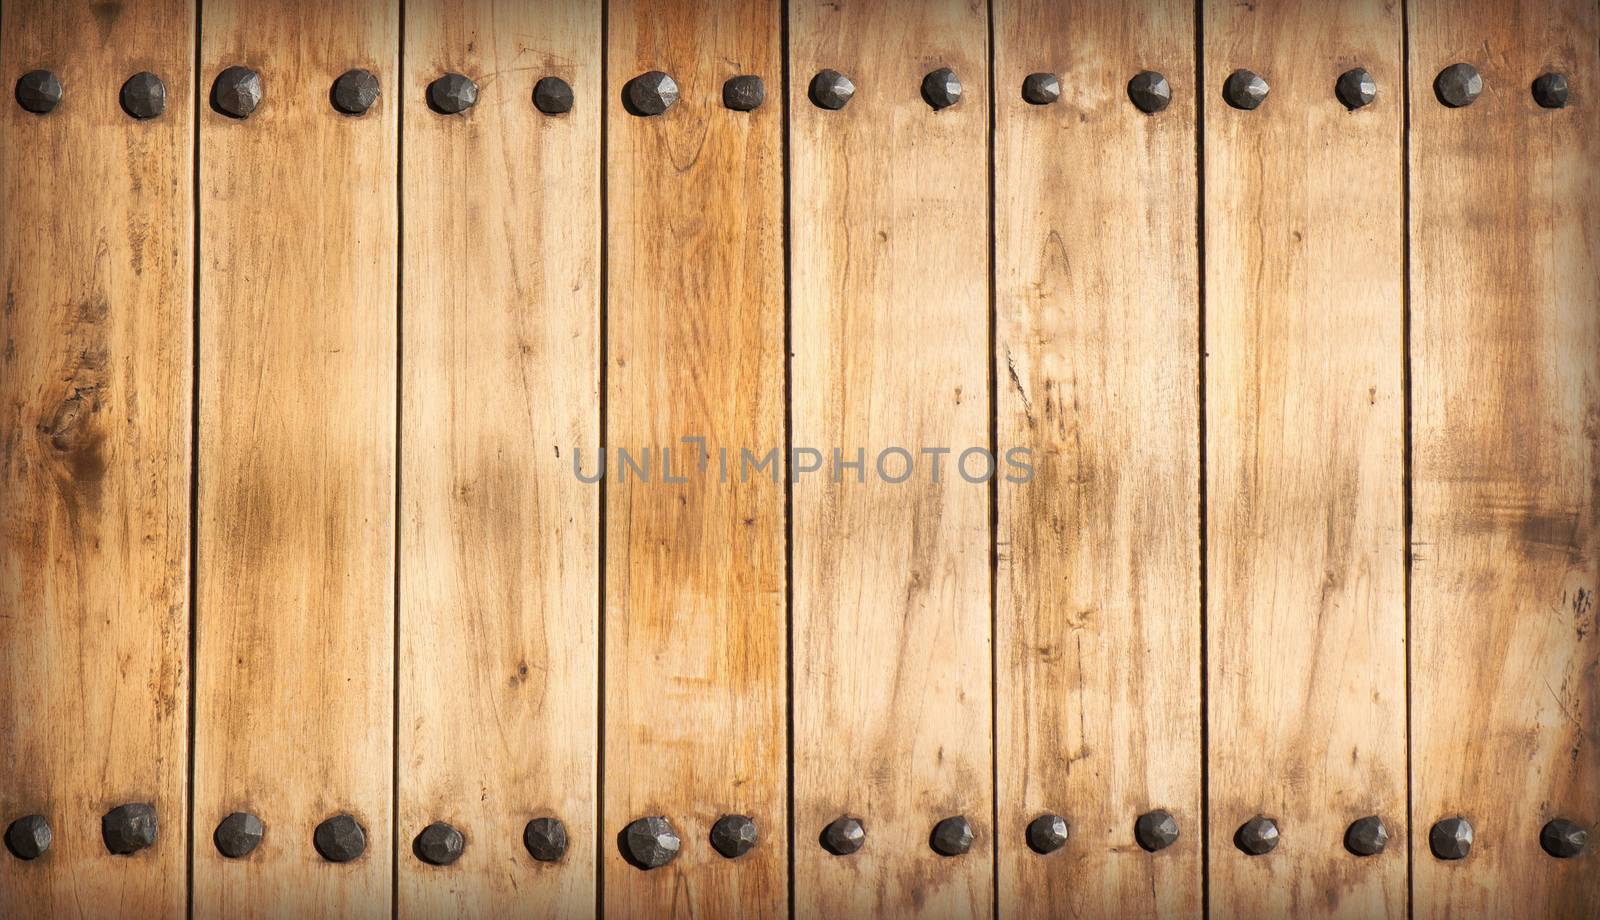 Wood clapboards background with several nails forming a frame